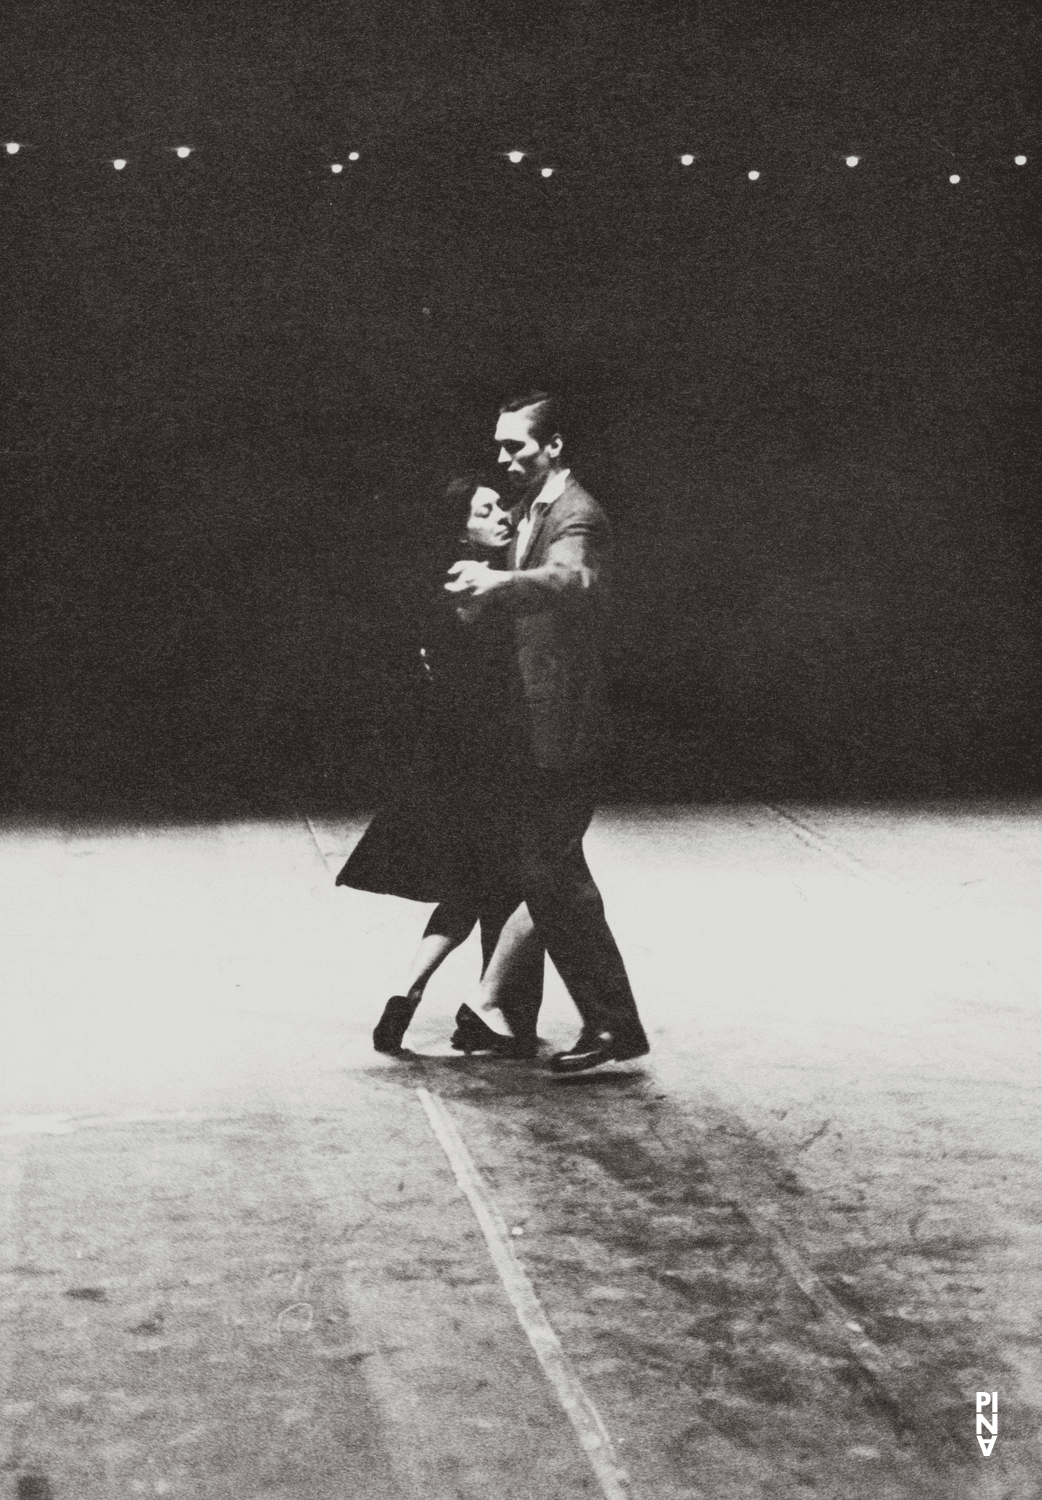 Francis Viet and Anne Marie Benati in “Viktor” by Pina Bausch at Teatro Argentina Rom